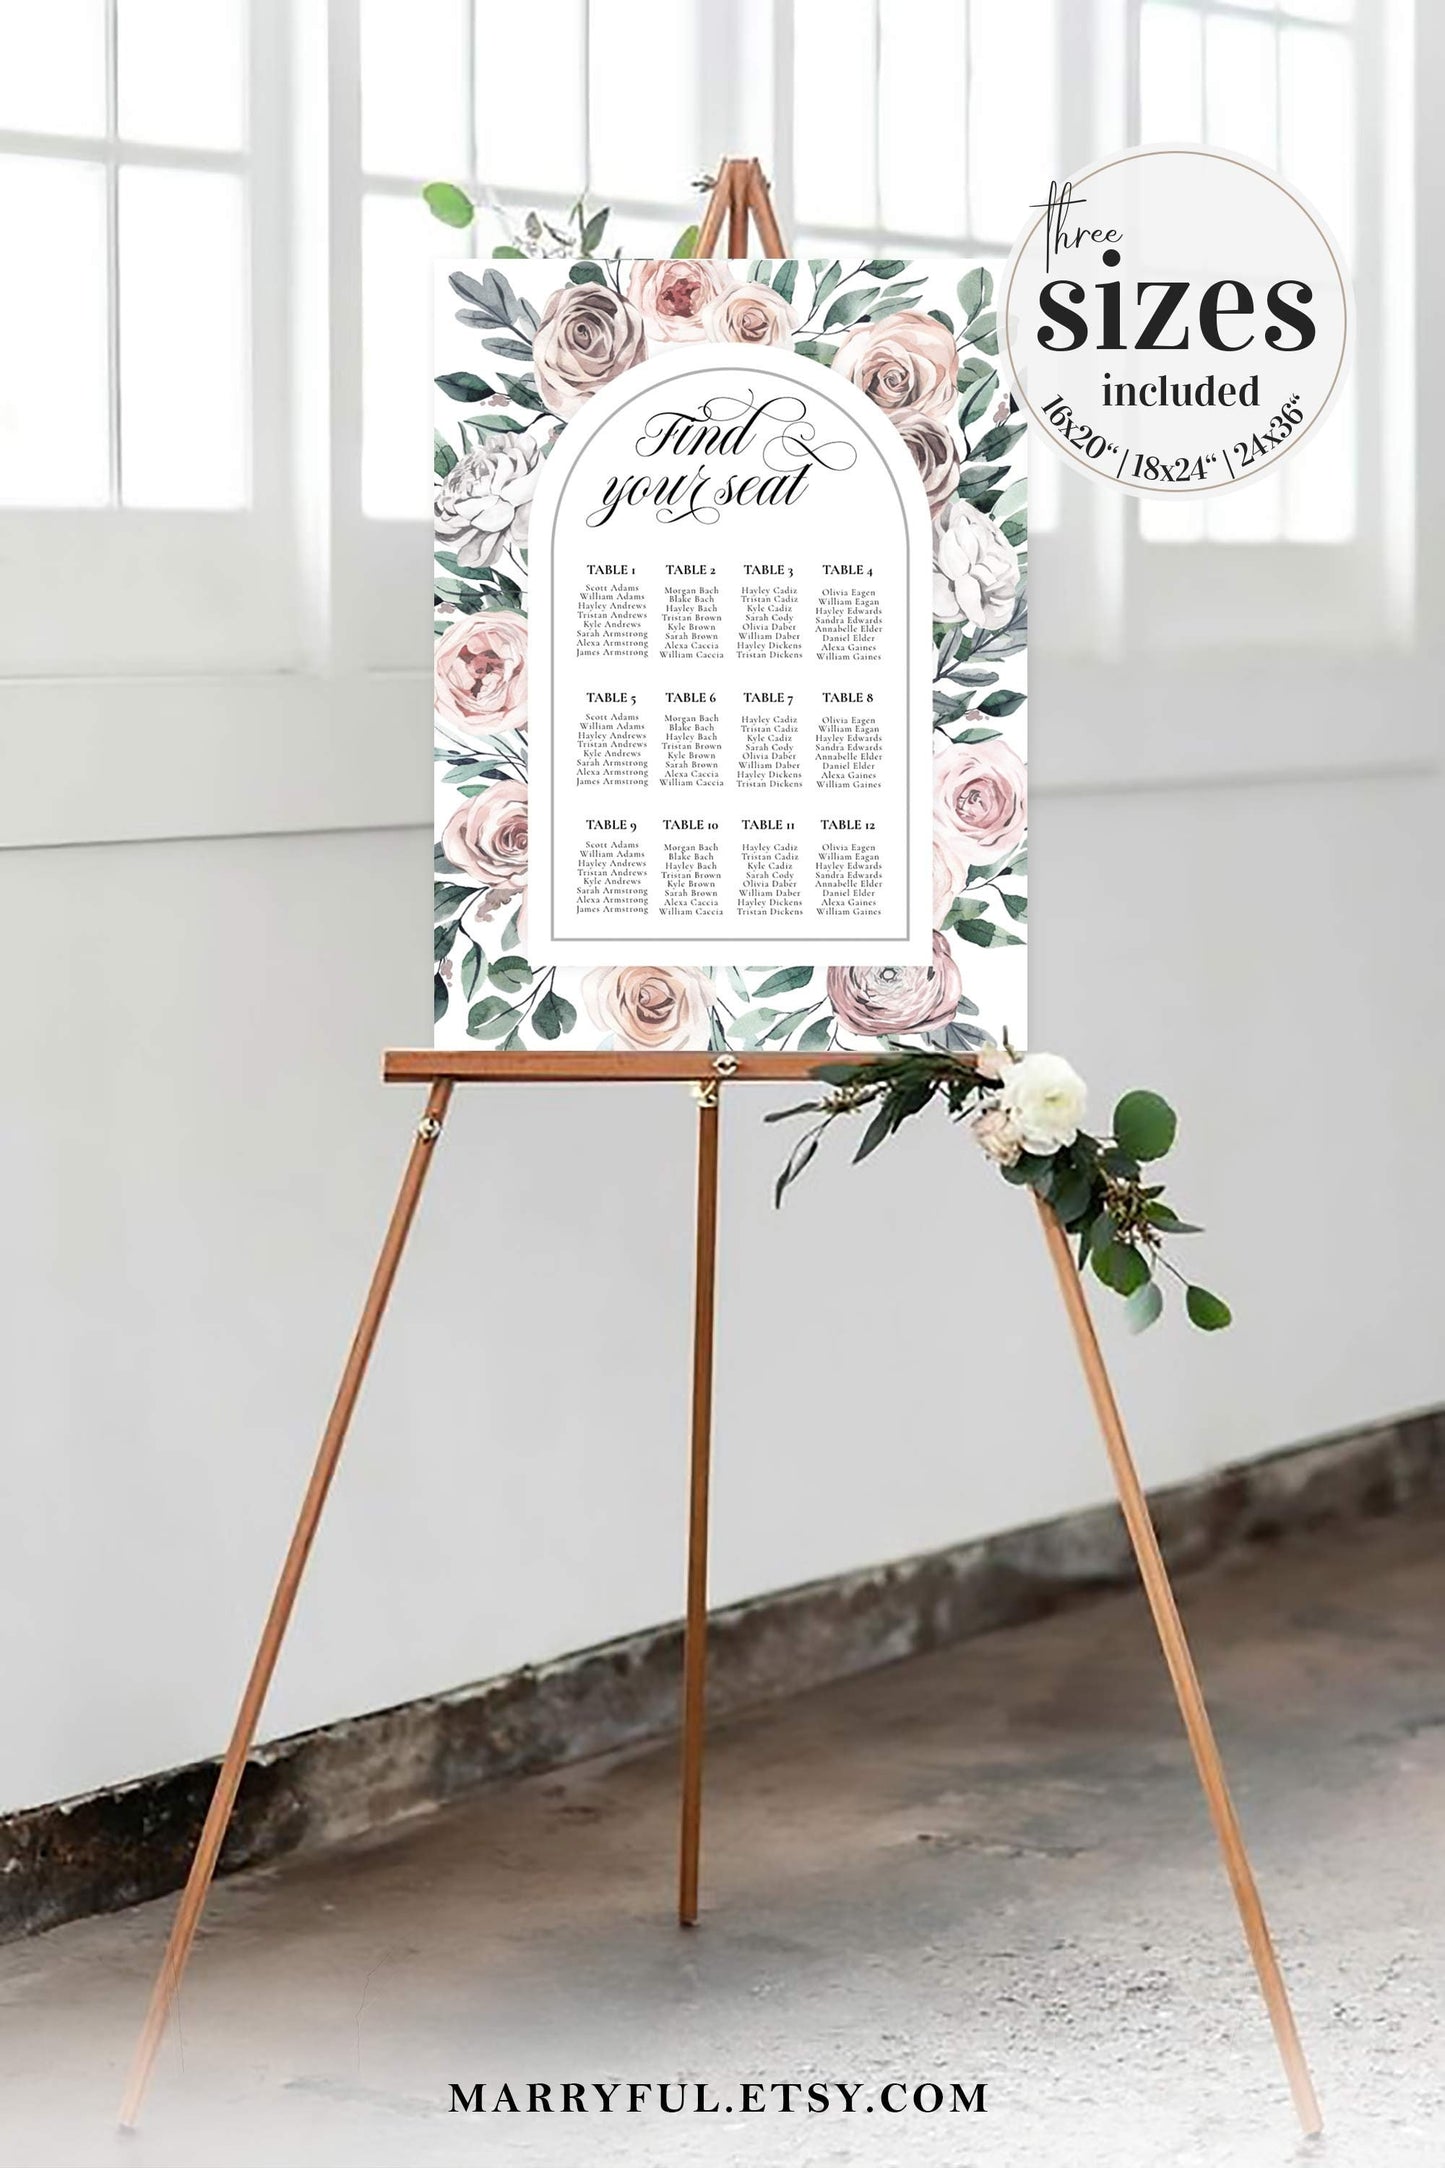 Rustic Wedding Seating Chart Template Download, Unique Wedding Decor, Seating Chart for Baby or Bridal Shower #005